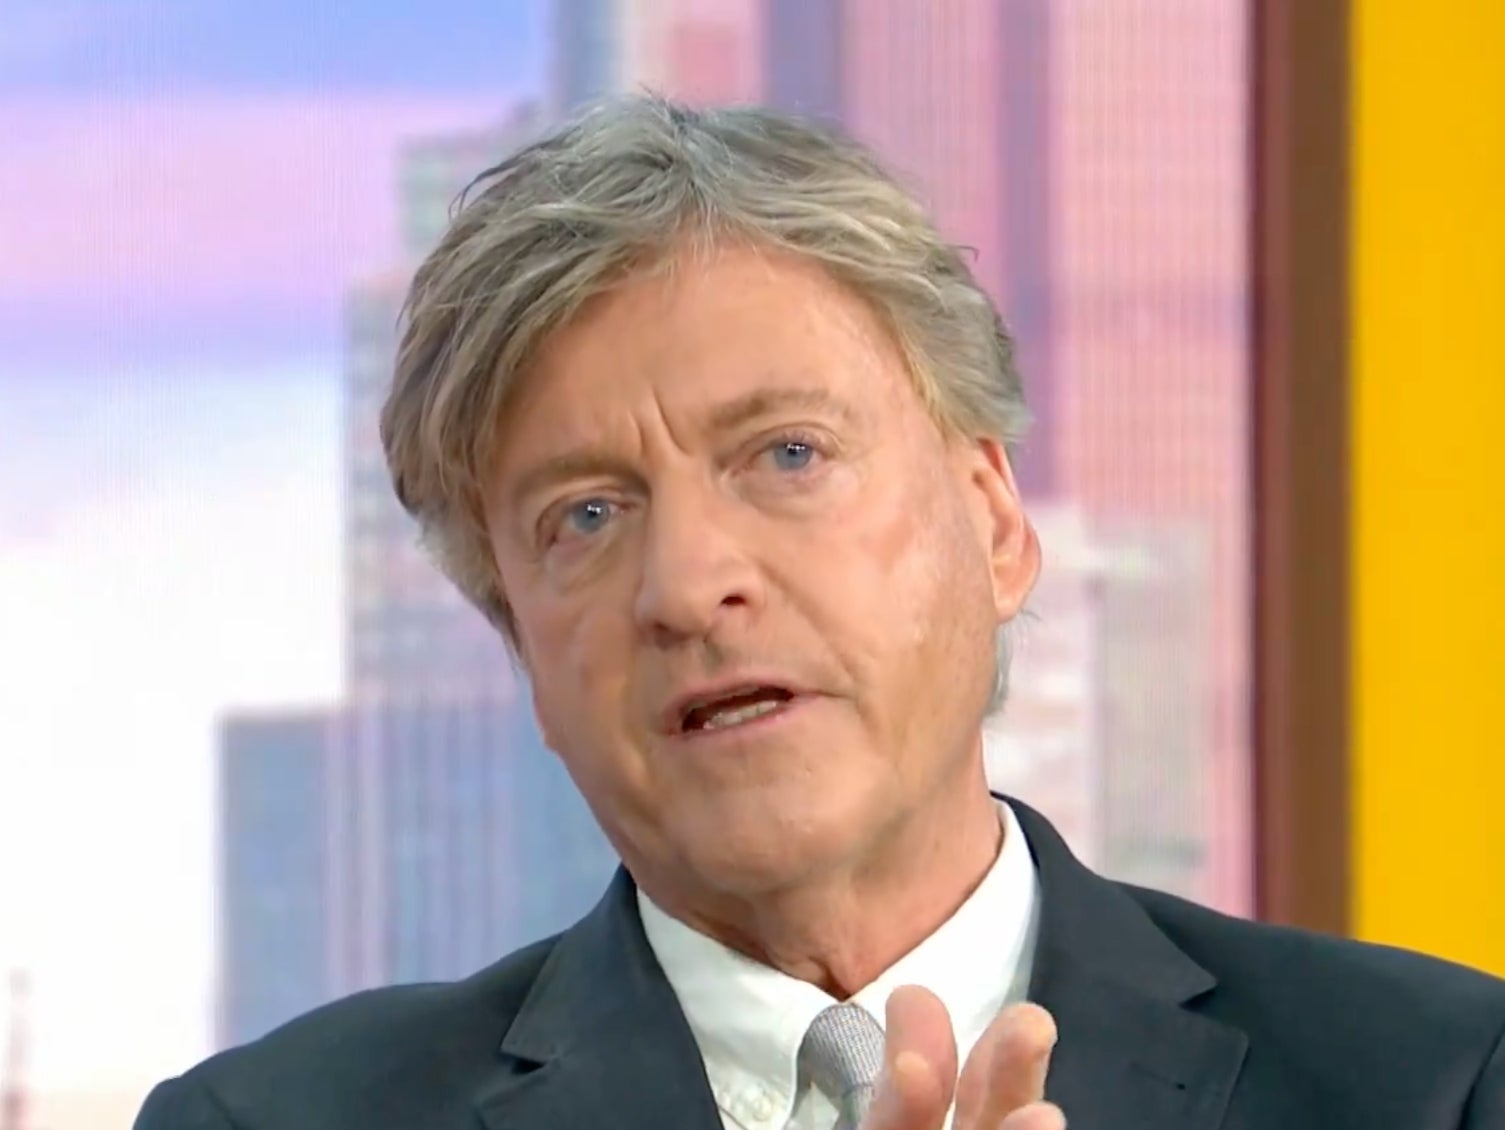 Richard Madeley complaining about Prince Harry on ‘GMB’